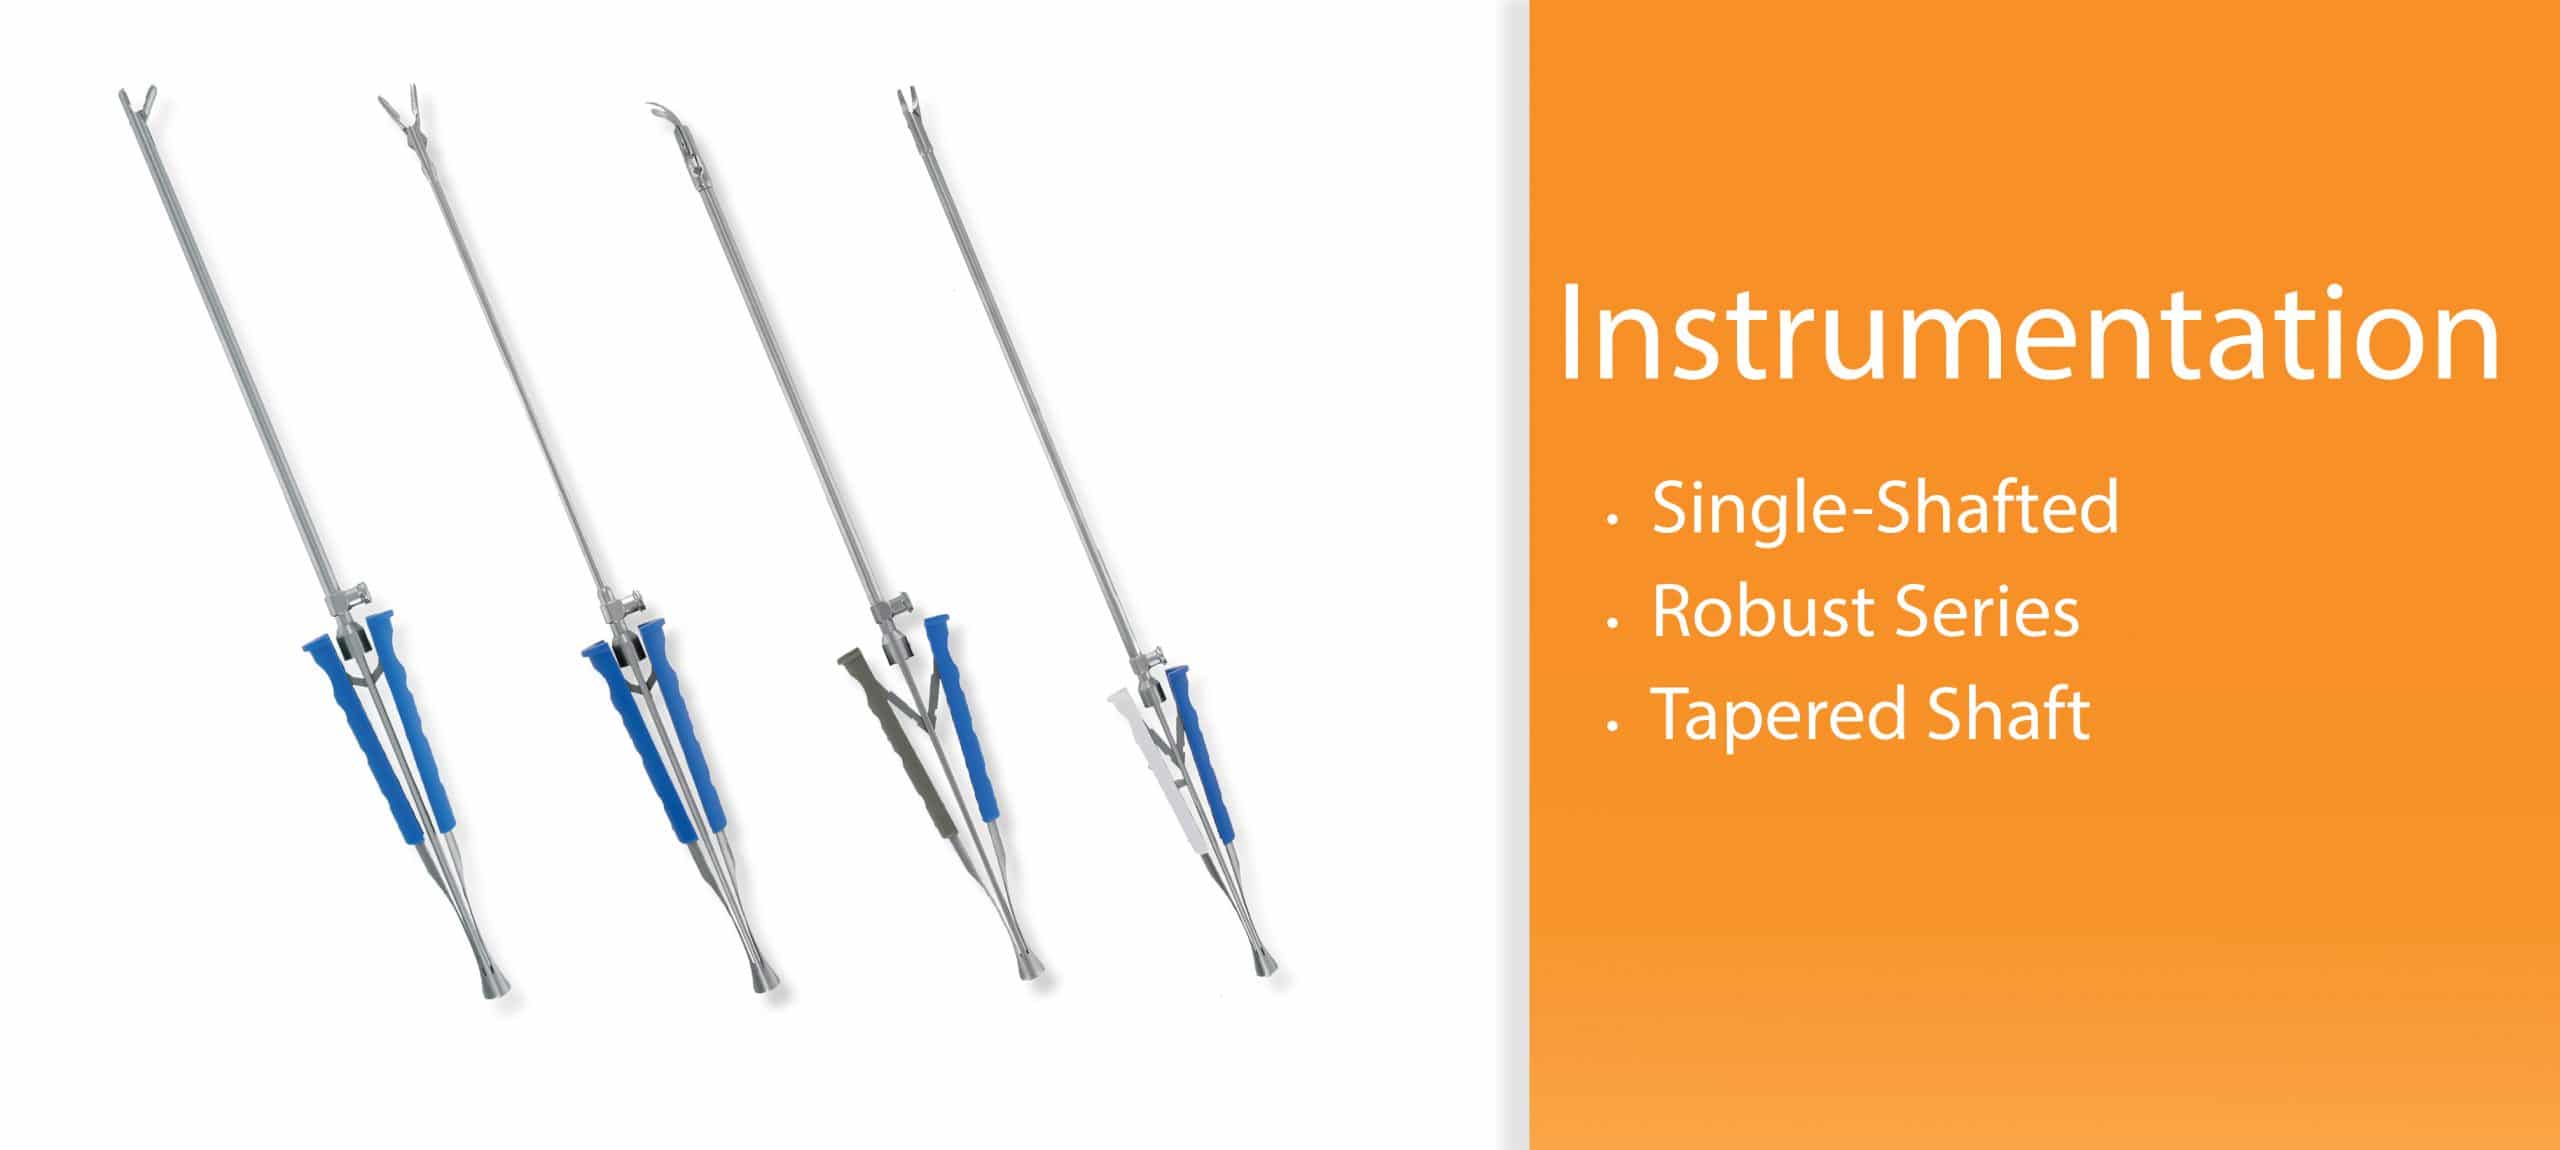 Right Anterior Thoracotomy Approach Instrumentation for Aortic Surgery from Delacroix-Chevalier